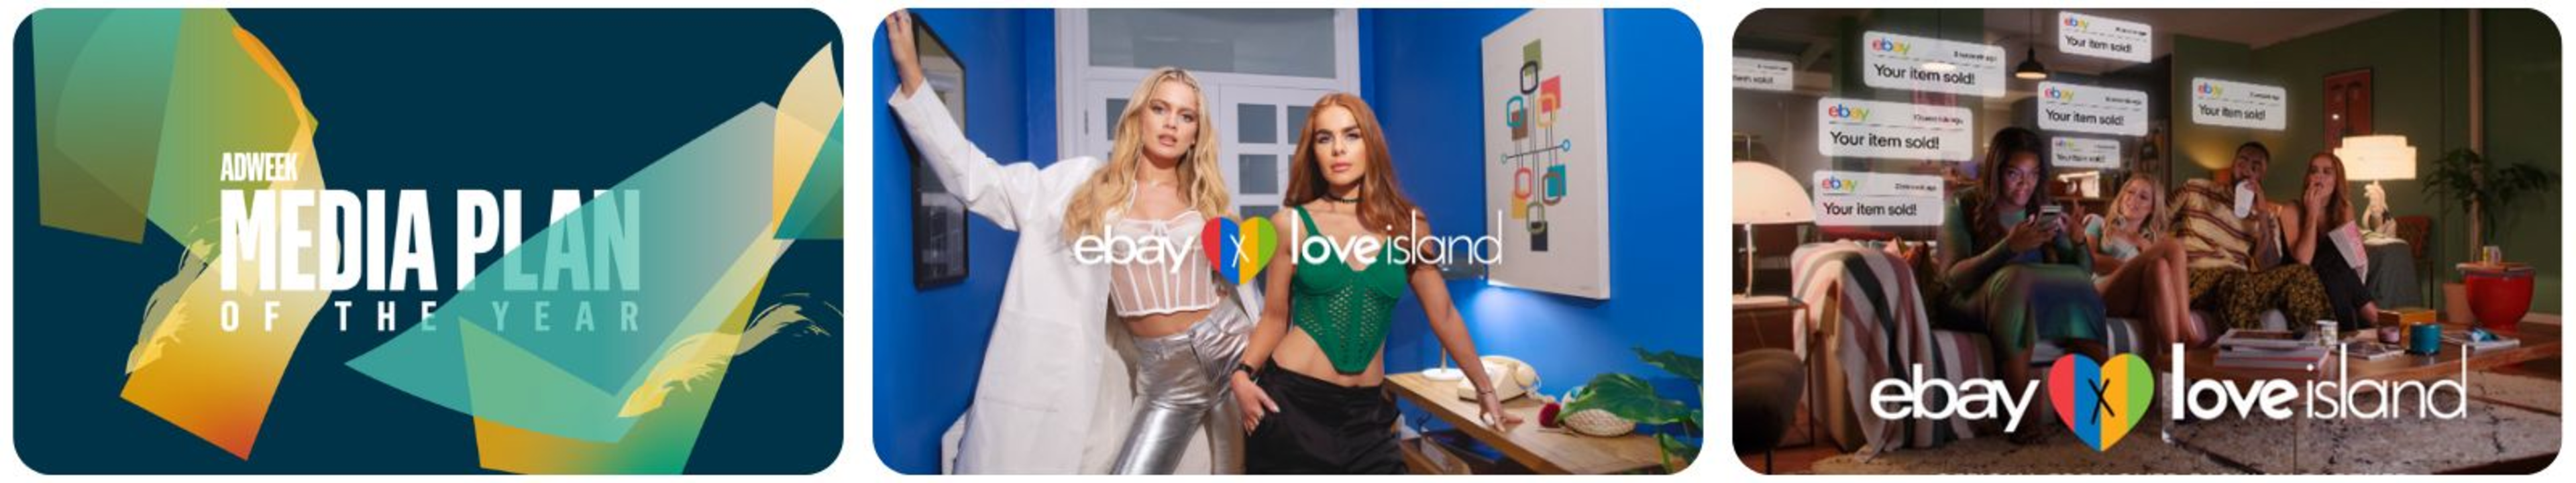 3 banner image for ebay x itv media plan of the year